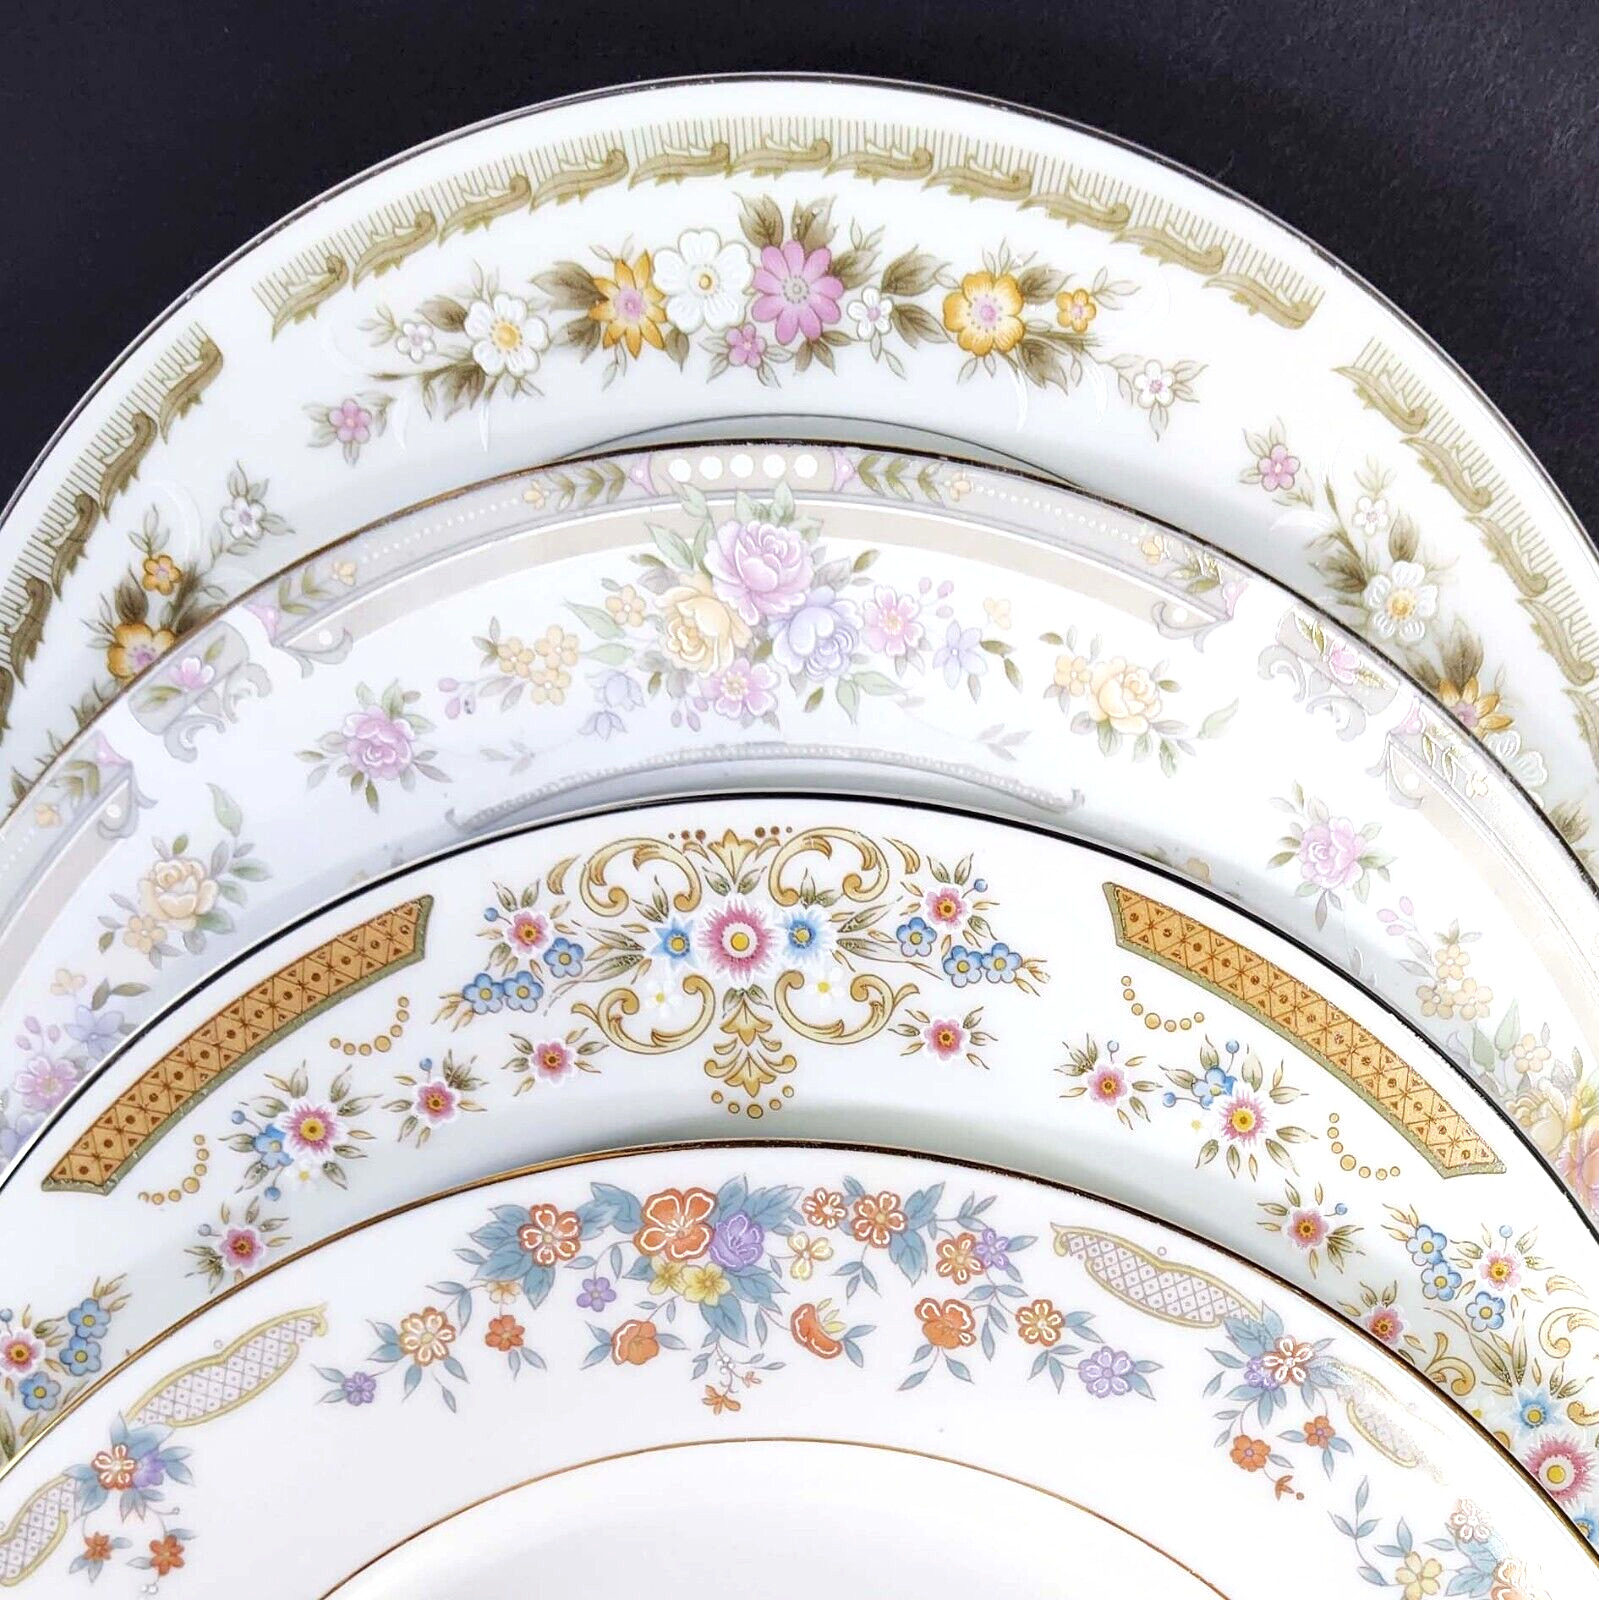 Mismatched Dinner Plates Vintage China Floral Rims Plates Mix and Match Set of 4